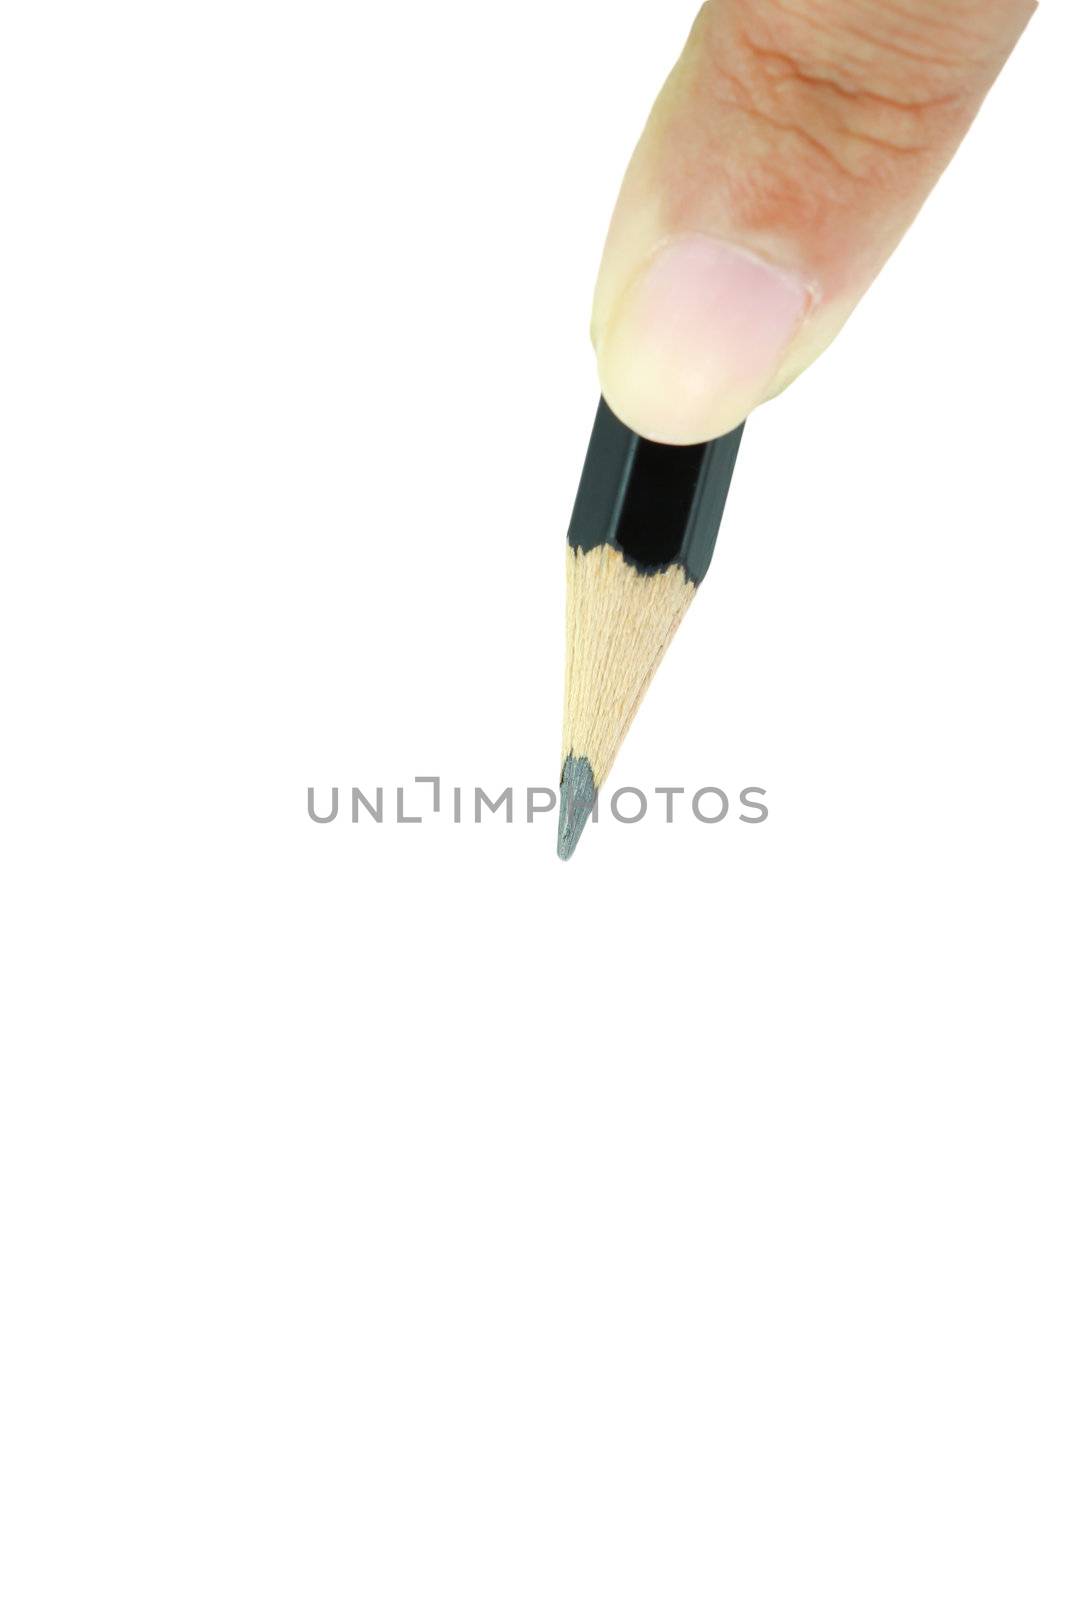 human hands with pencil and writting something by bajita111122